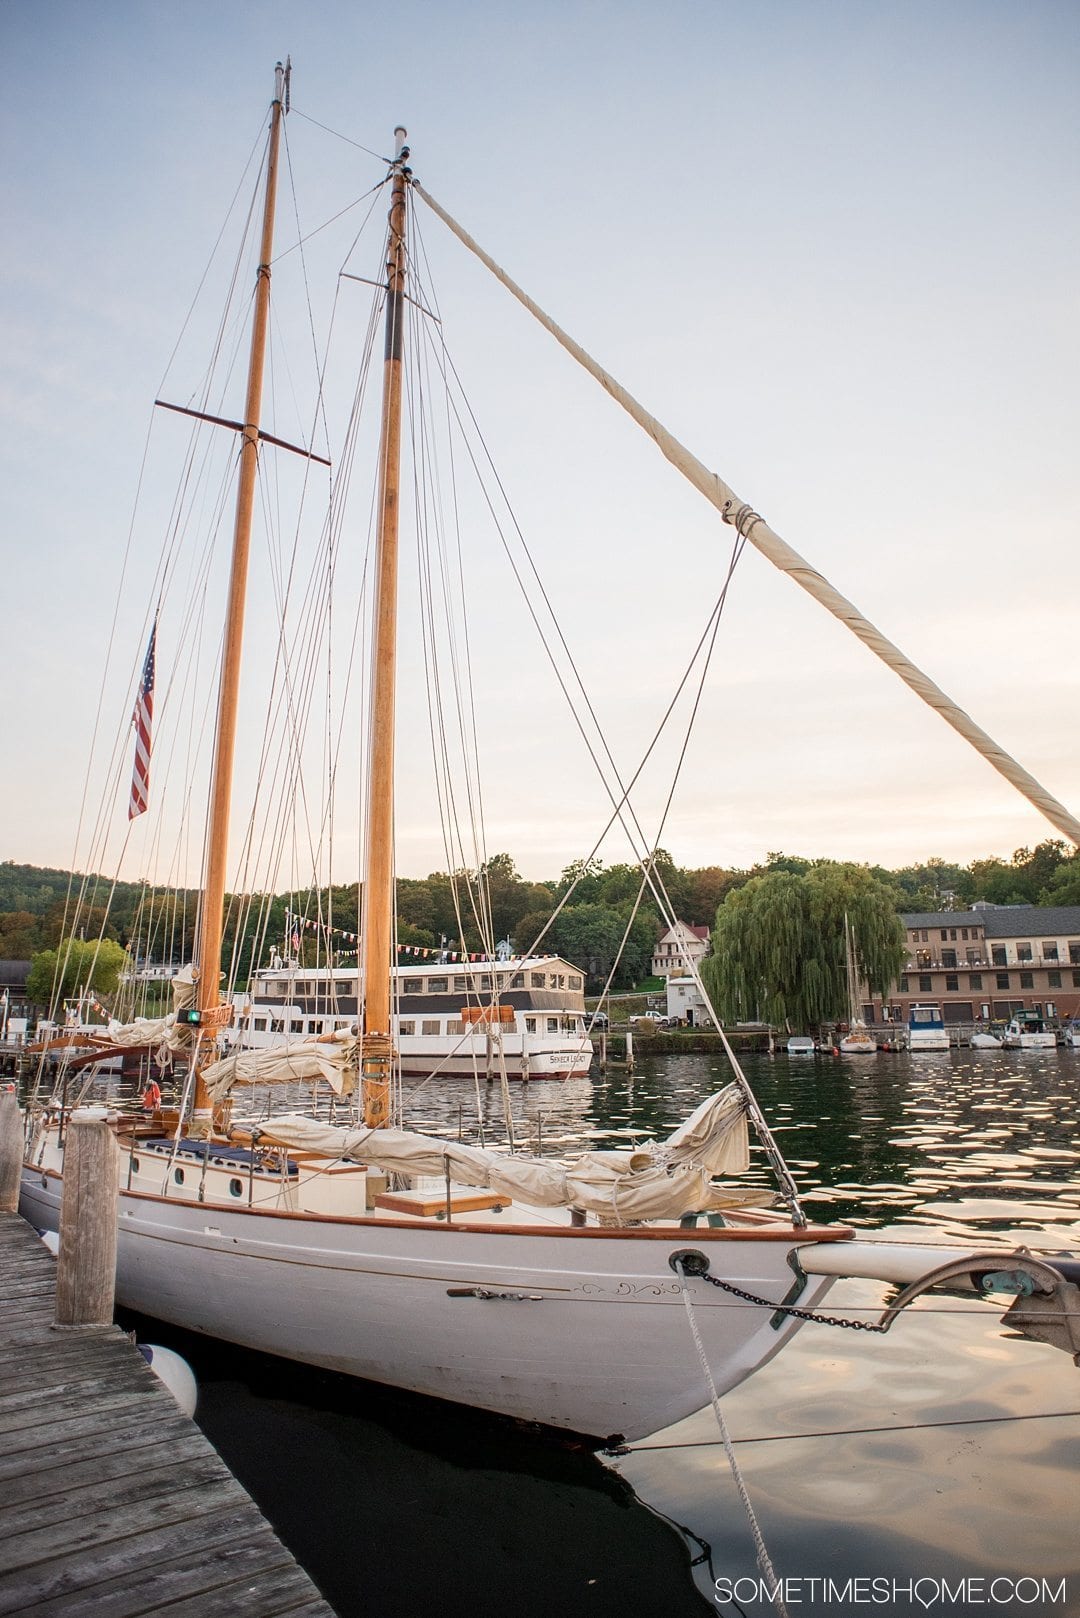 Romantic places in New York State with a weekend trip to Watkins Glen. Take a road trip from NYC to this Finger Lakes destination and take a sailboat ride on a beautiful lake aboard "True Love." Click through to see exactly what activities make it so romantic! #FingerLakesVacations #RomanticGetawayAdvenutres